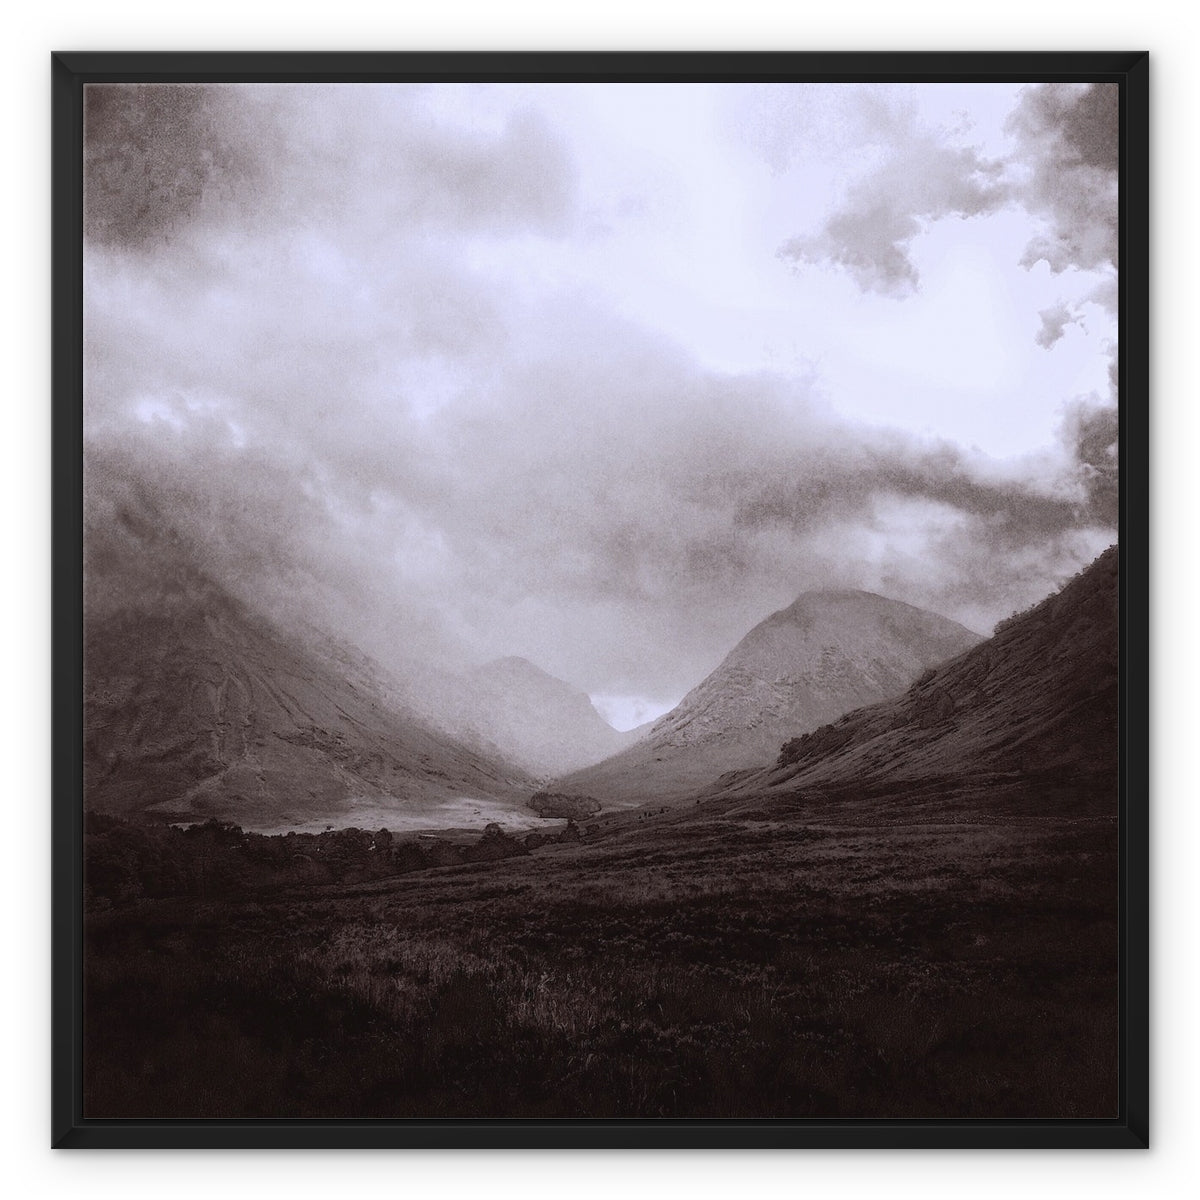 Glencoe Mist Painting | Framed Canvas From Scotland-Floating Framed Canvas Prints-Glencoe Art Gallery-24"x24"-Black Frame-Paintings, Prints, Homeware, Art Gifts From Scotland By Scottish Artist Kevin Hunter